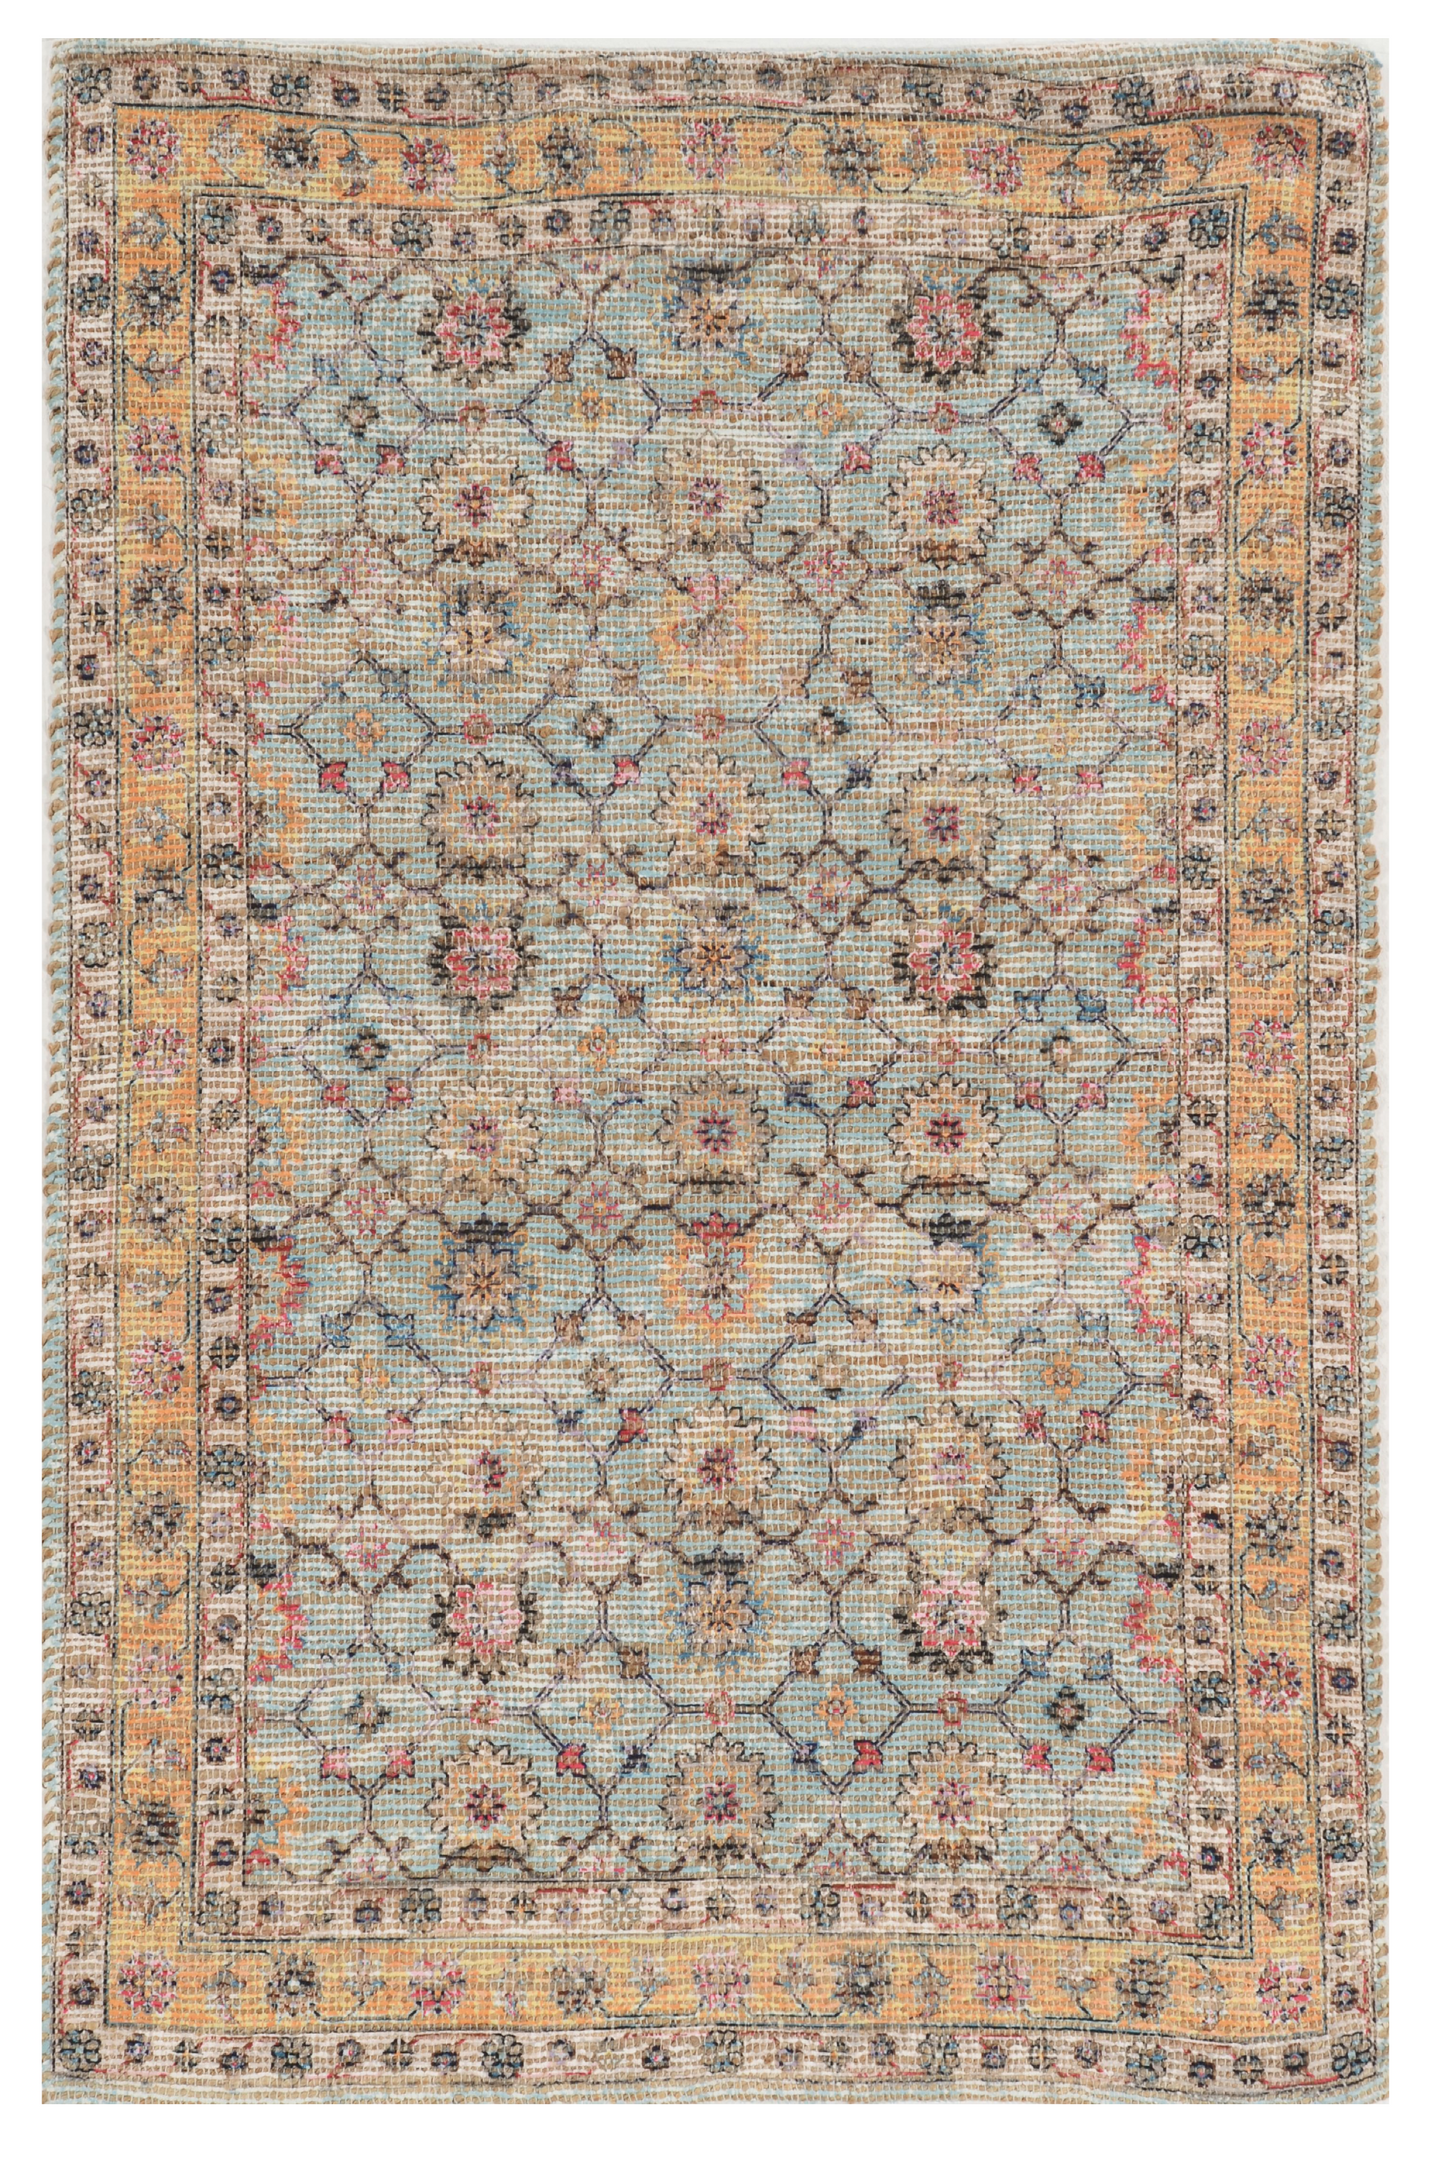 2' X 4' Blue and Orange Floral Hand Woven Area Rug